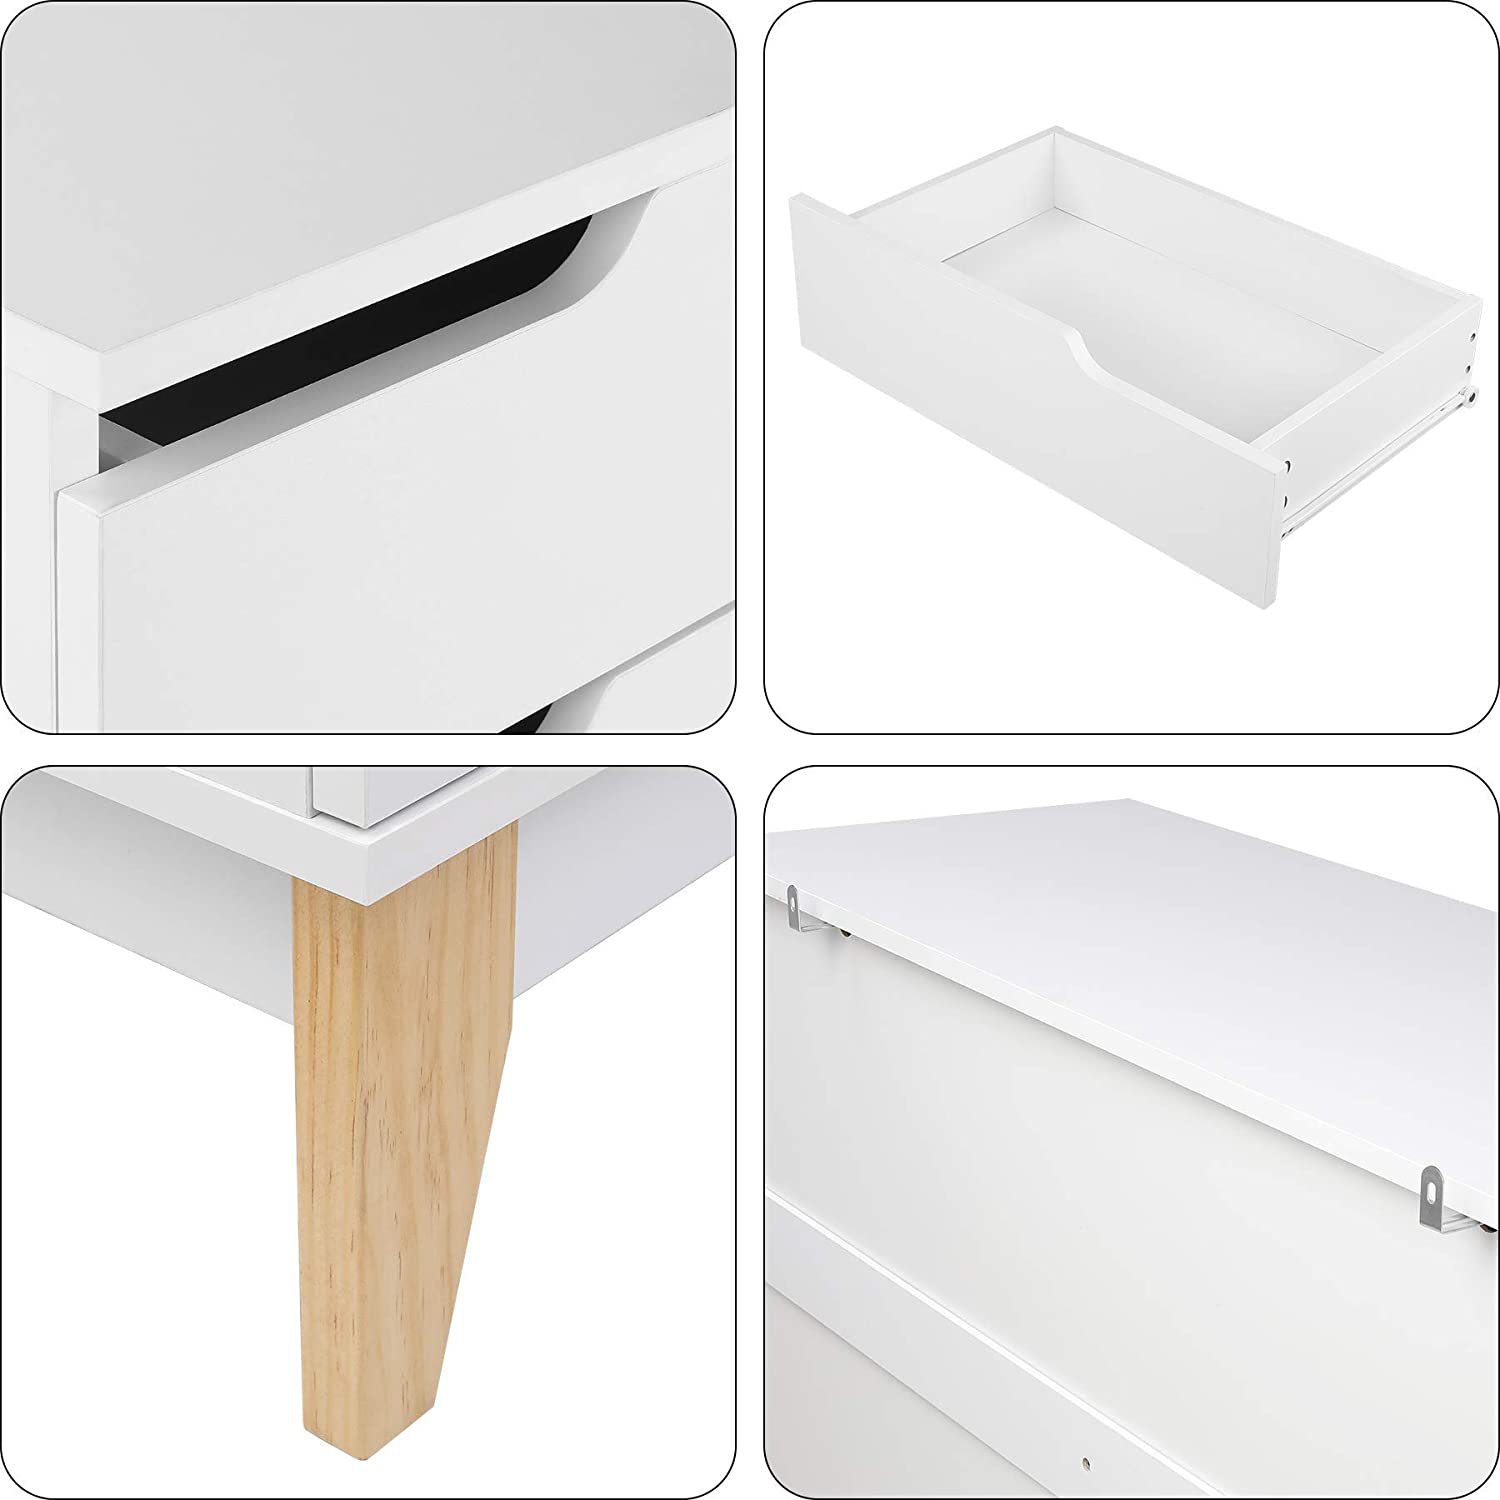 Lynton Chest of 6 Drawers White Cupboard Storage 